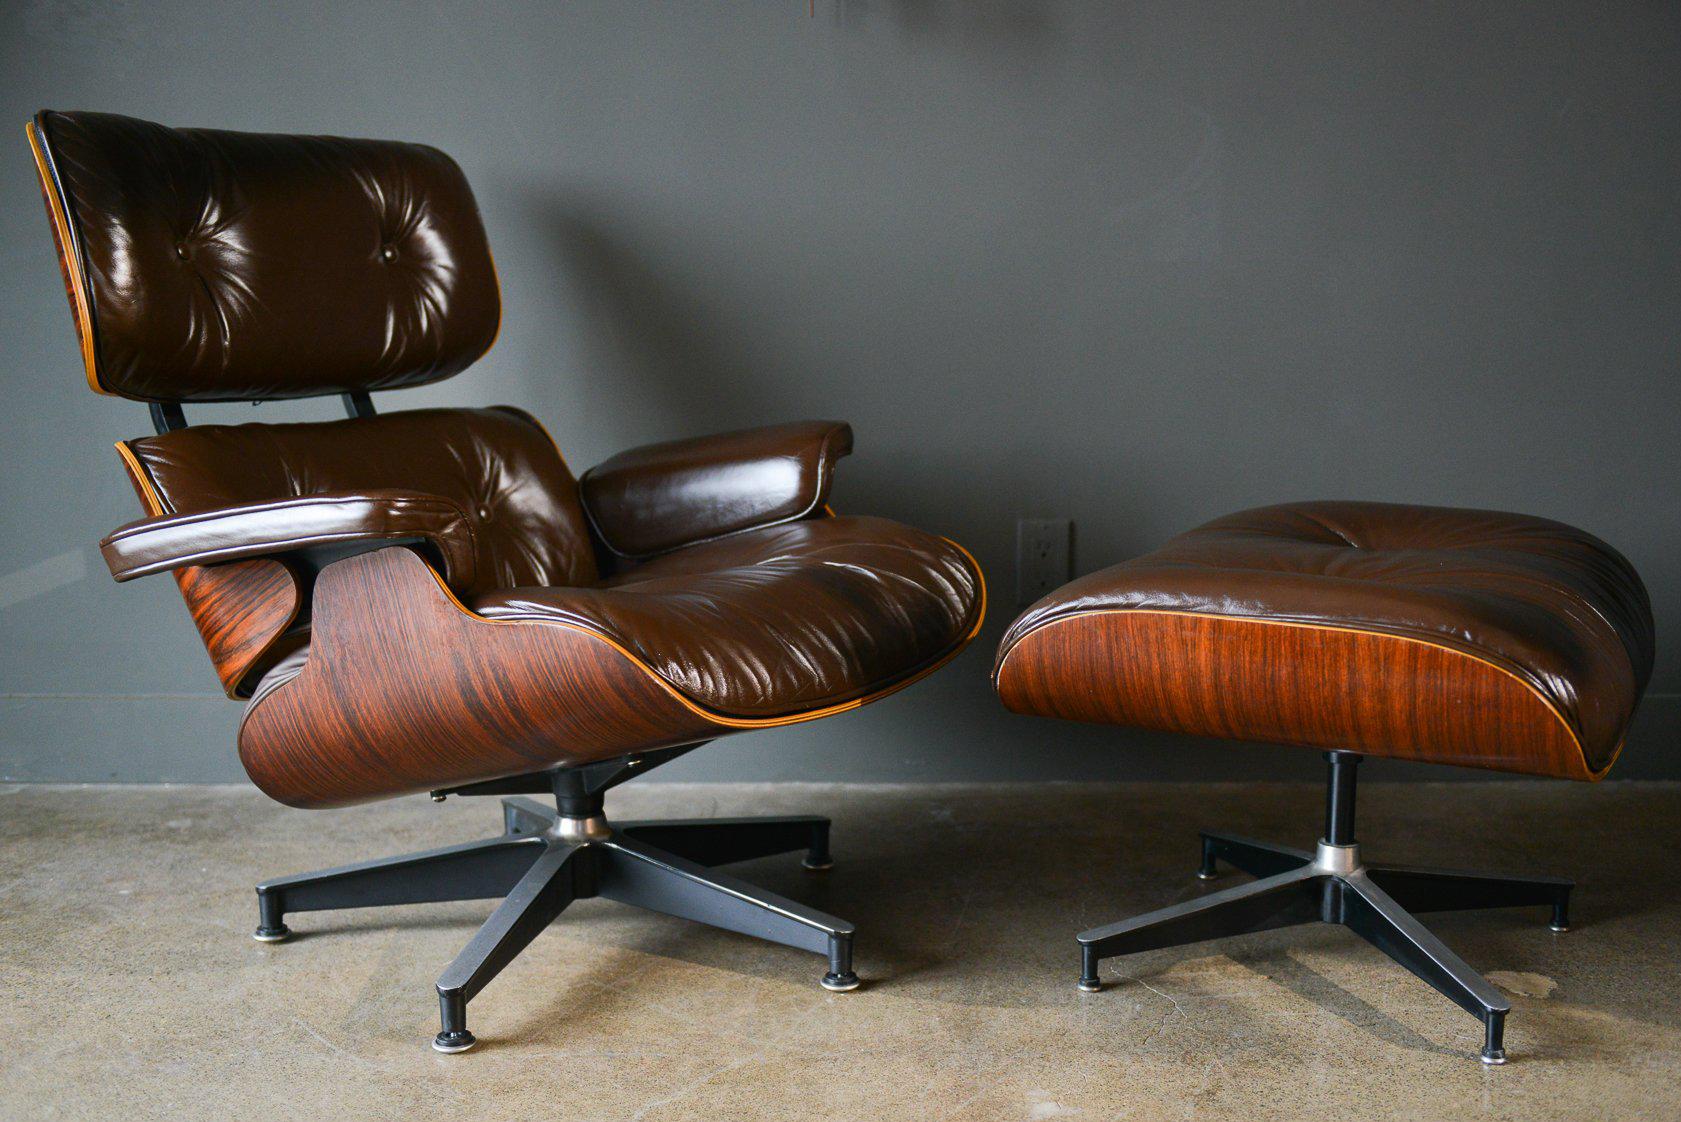 Chocolate brown leather and rosewood Eames lounge chair and ottoman. Designed by Charles Eames for Herman Miller. Model 670/671. Gorgeous leather with just the right amount of suppleness. Excellent vintage condition, rosewood frame has beautiful